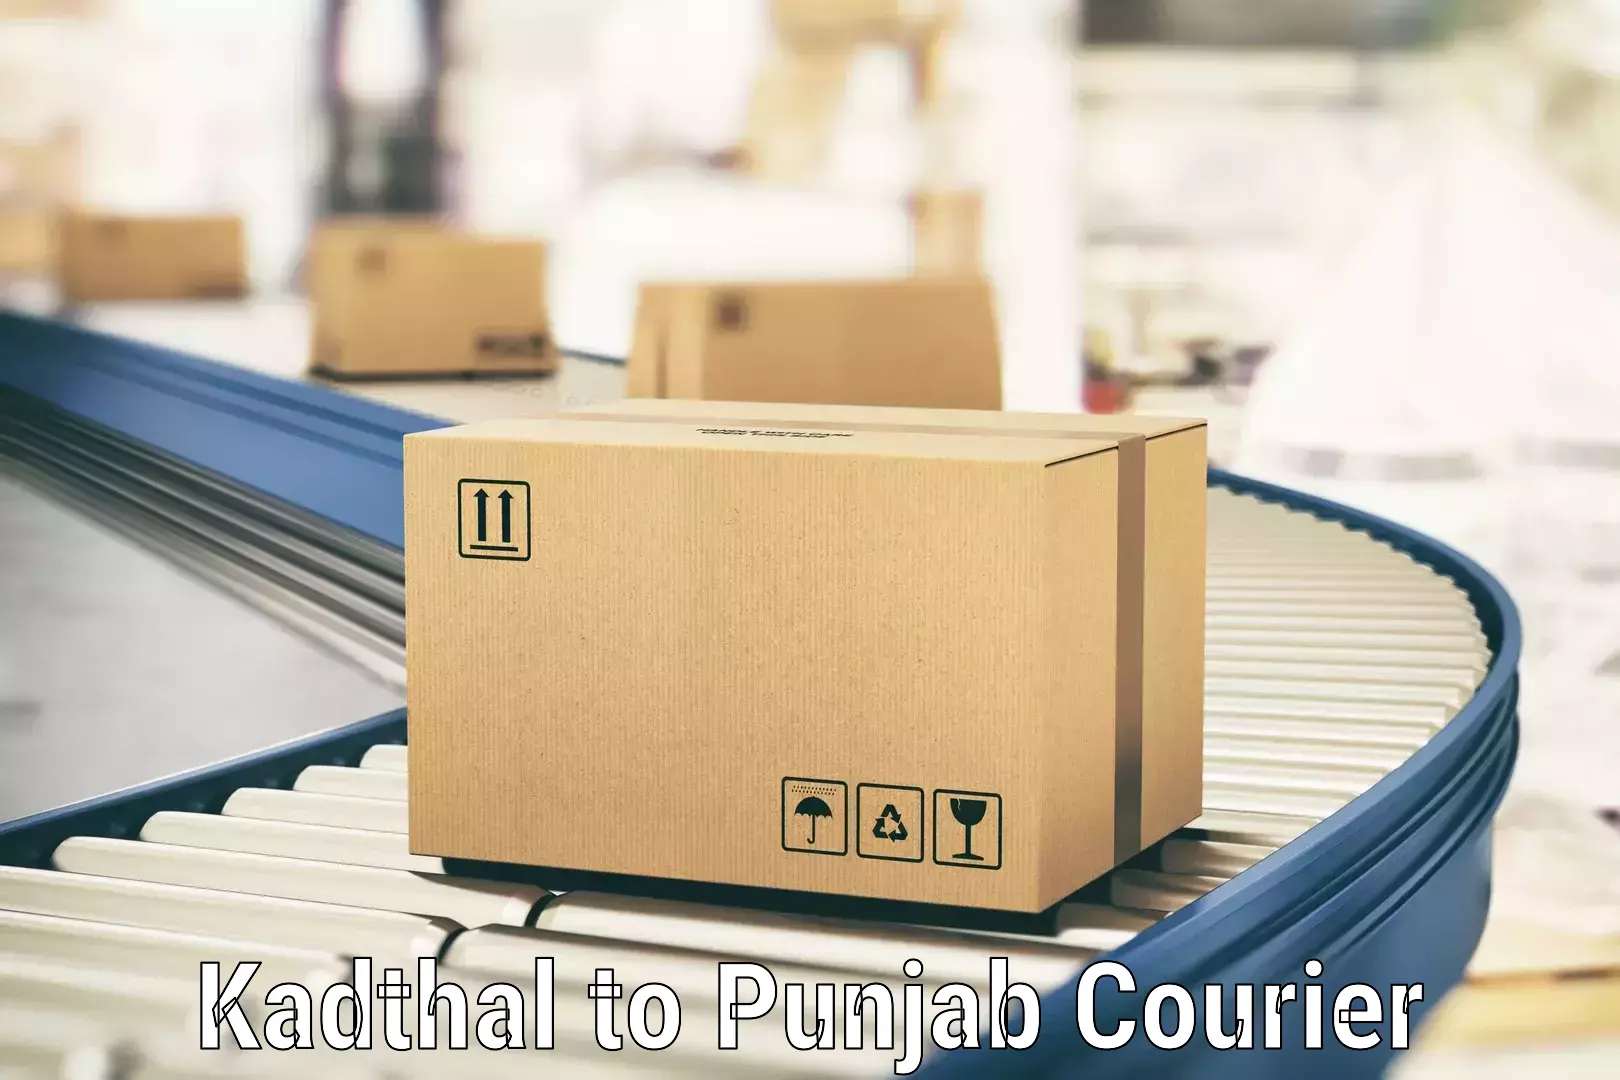 Express delivery capabilities Kadthal to Punjab